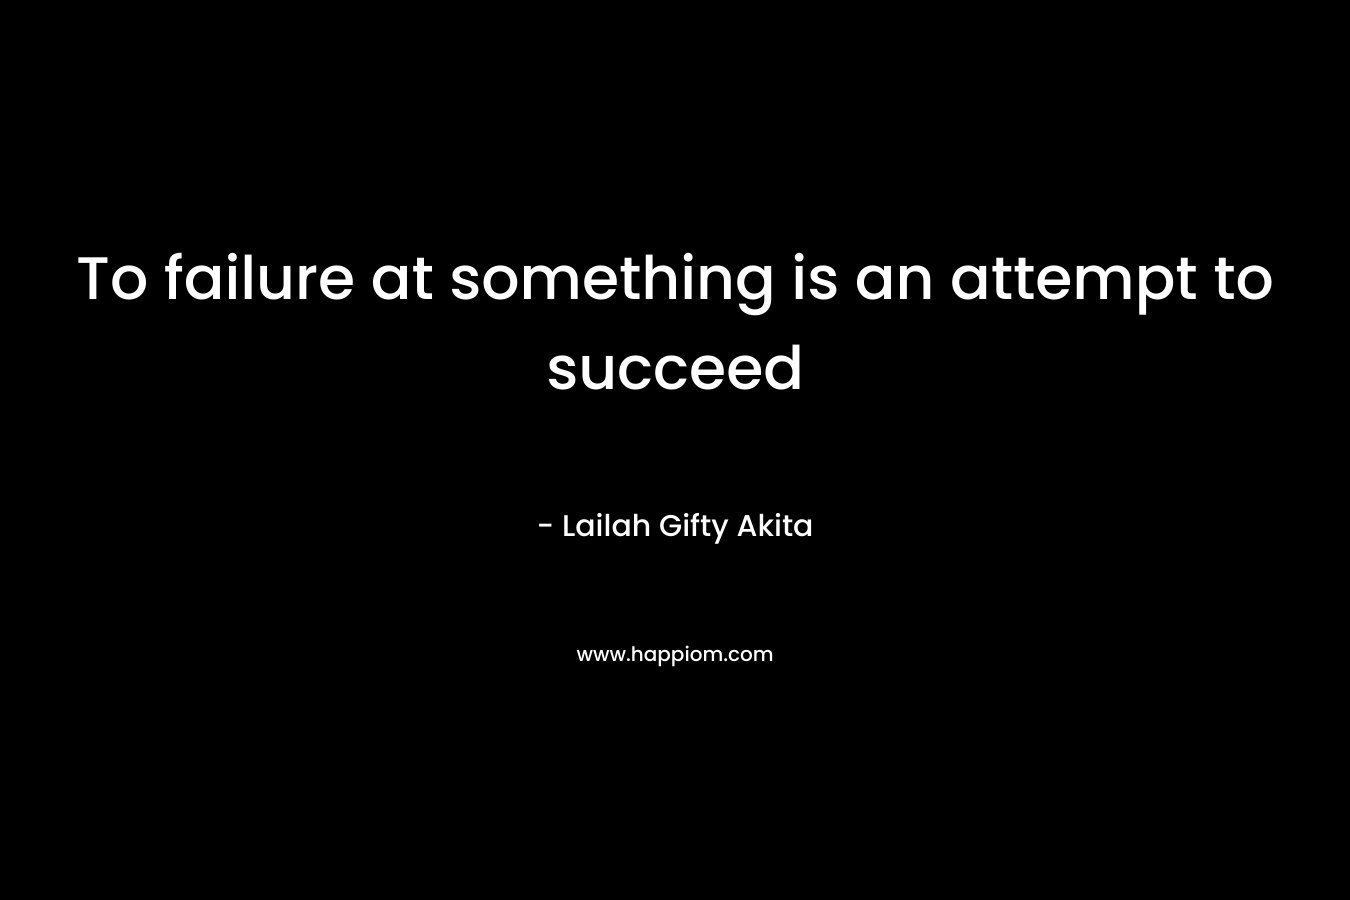 To failure at something is an attempt to succeed